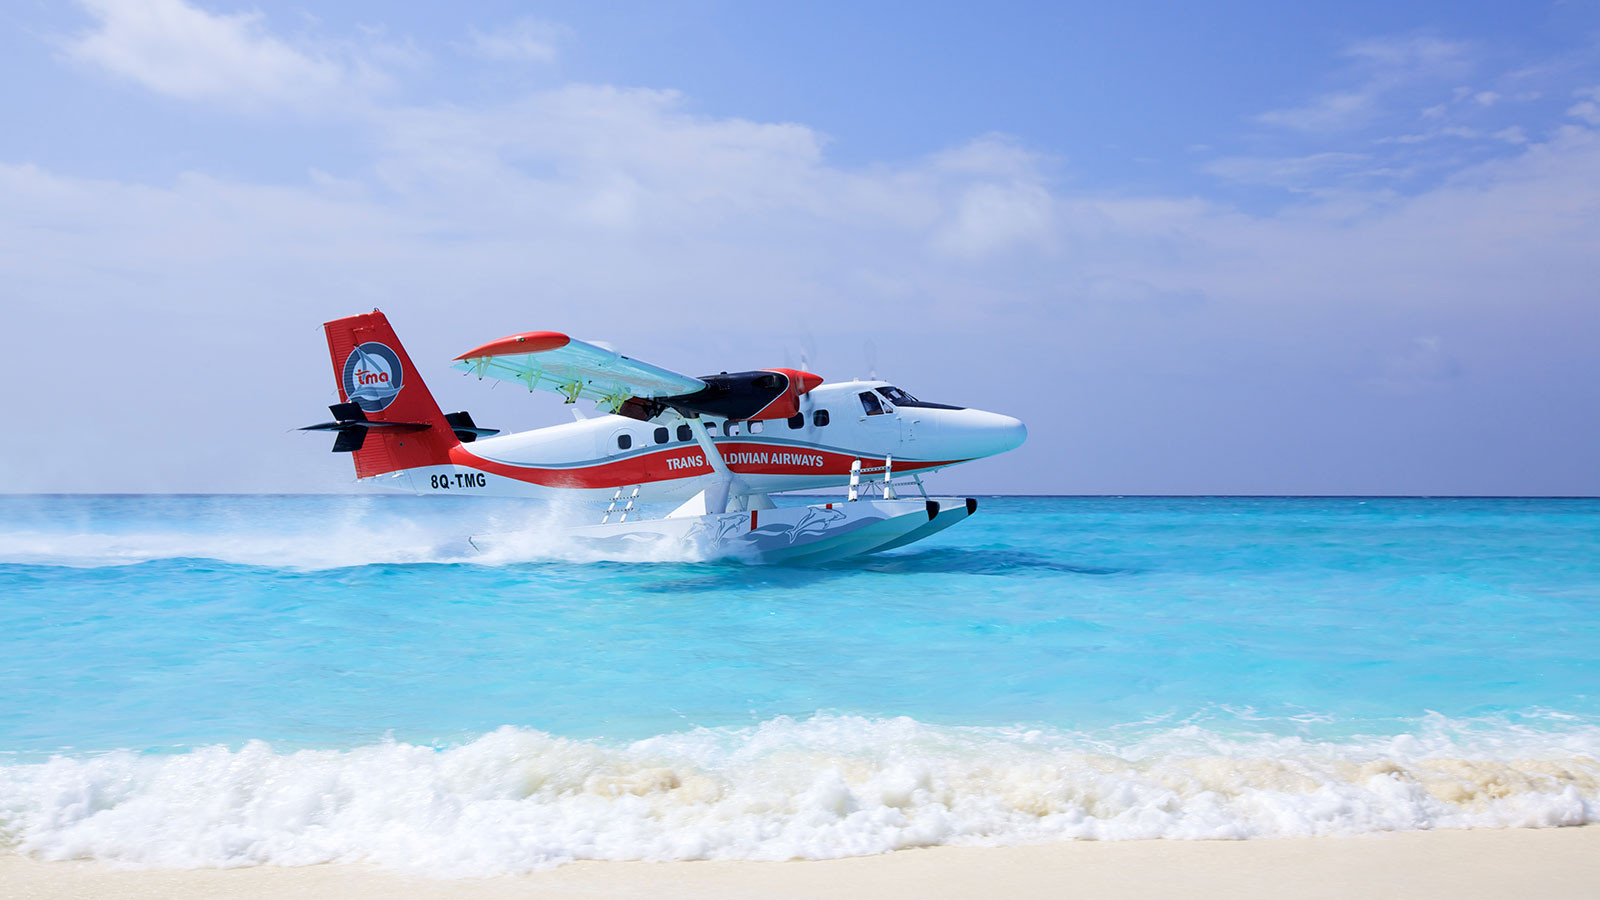 Trans Maldivian Airways Welcomes You to Experience Unique Seaplane Journey